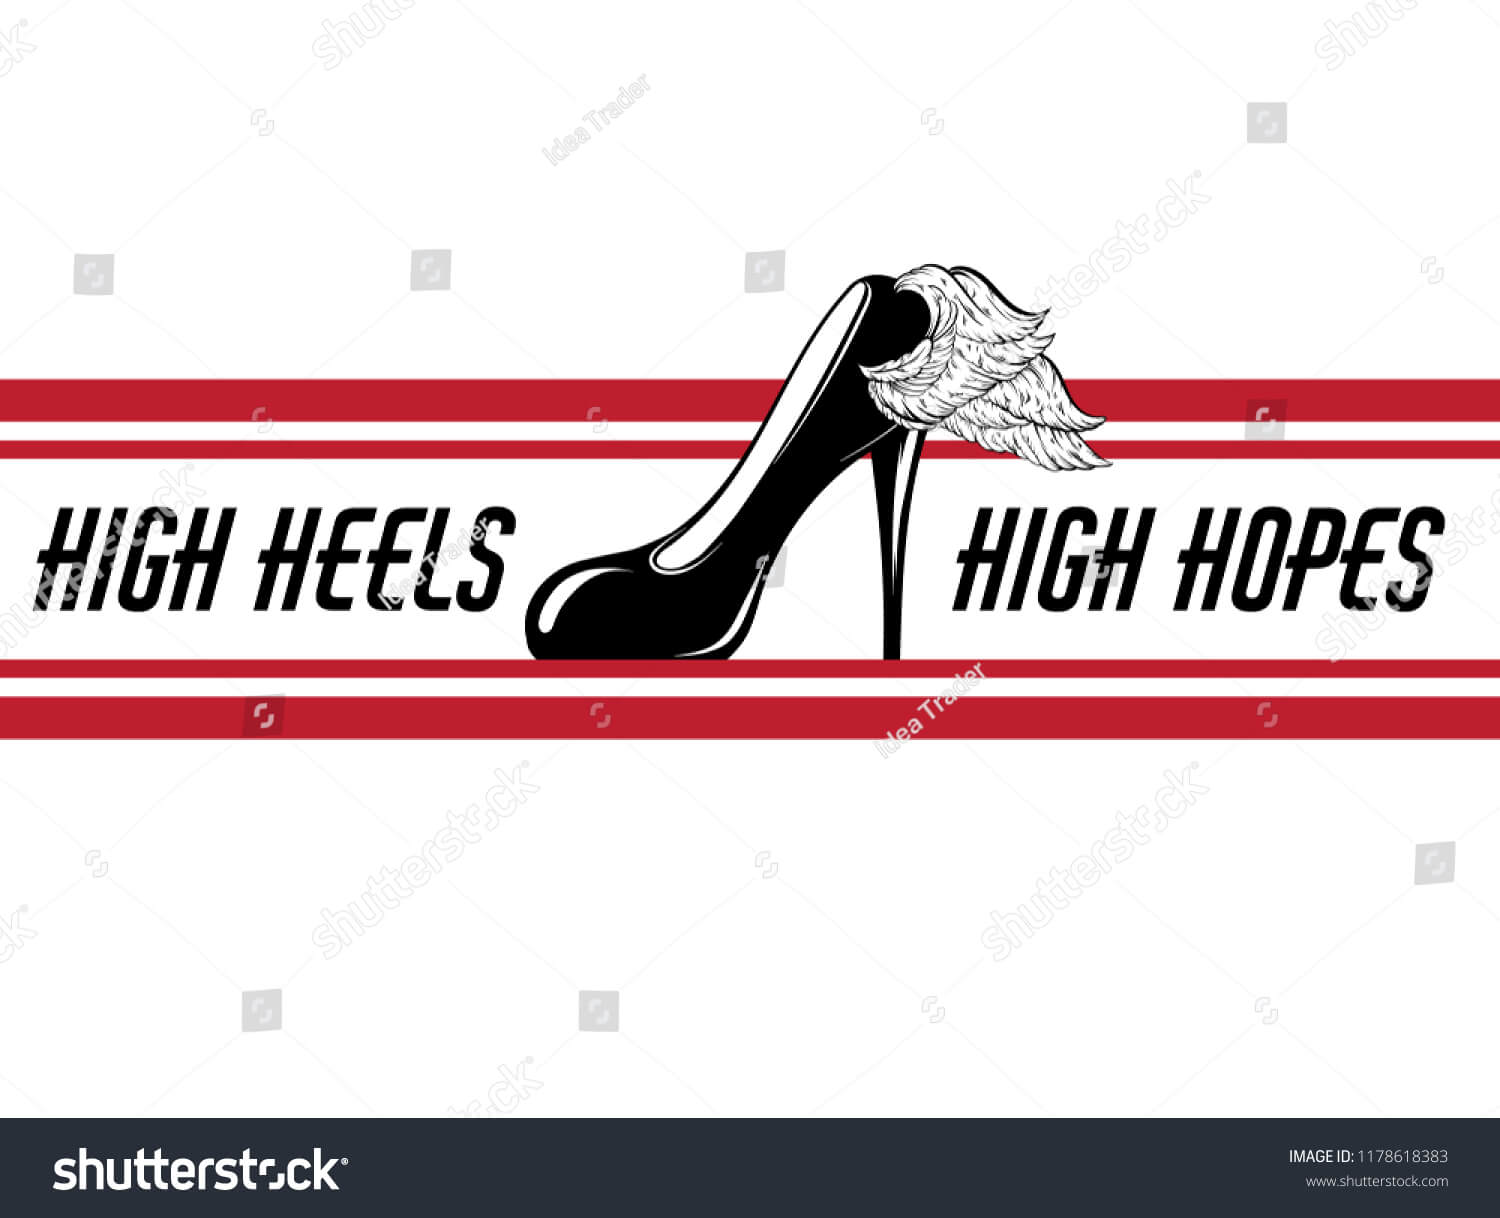 High Heels High Hopes Vector Hand Stock Vector (Royalty Free Inside High Heel Shoe Template For Card